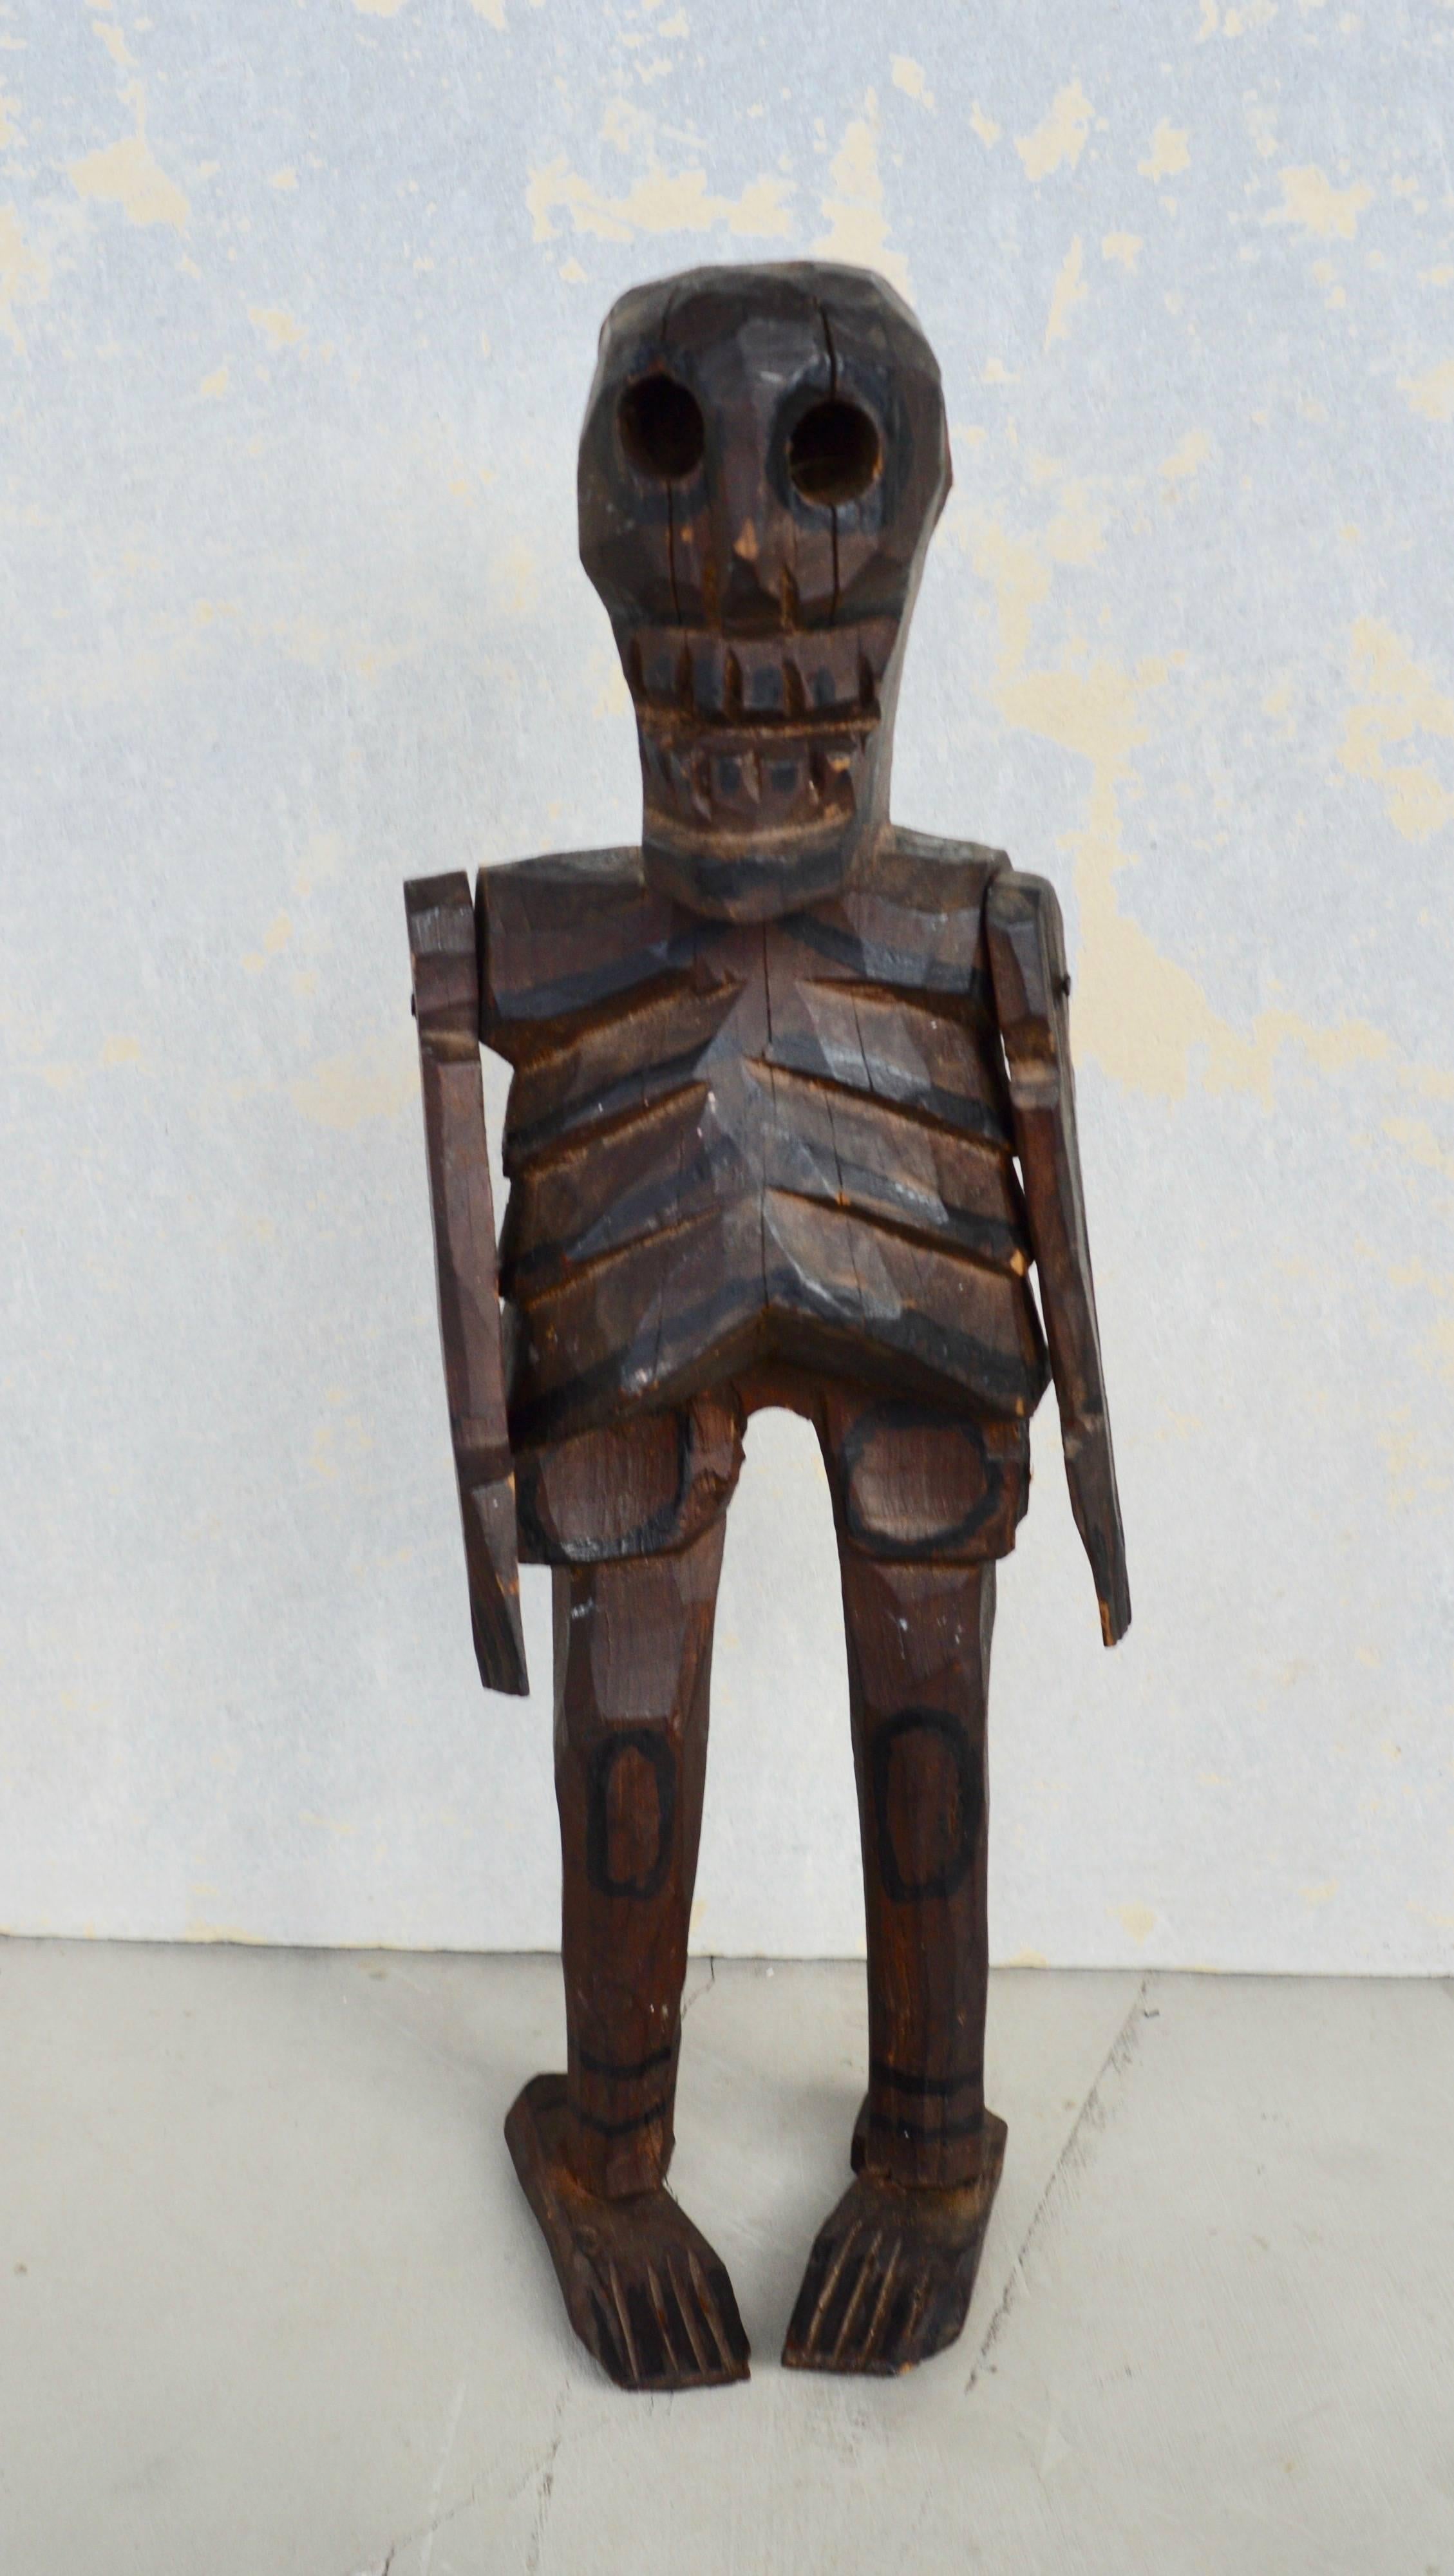 Fantastic articulating wood skeleton Santo. Hand-carved and hand-painted. Great lines and detail. Excellent vintage condition.